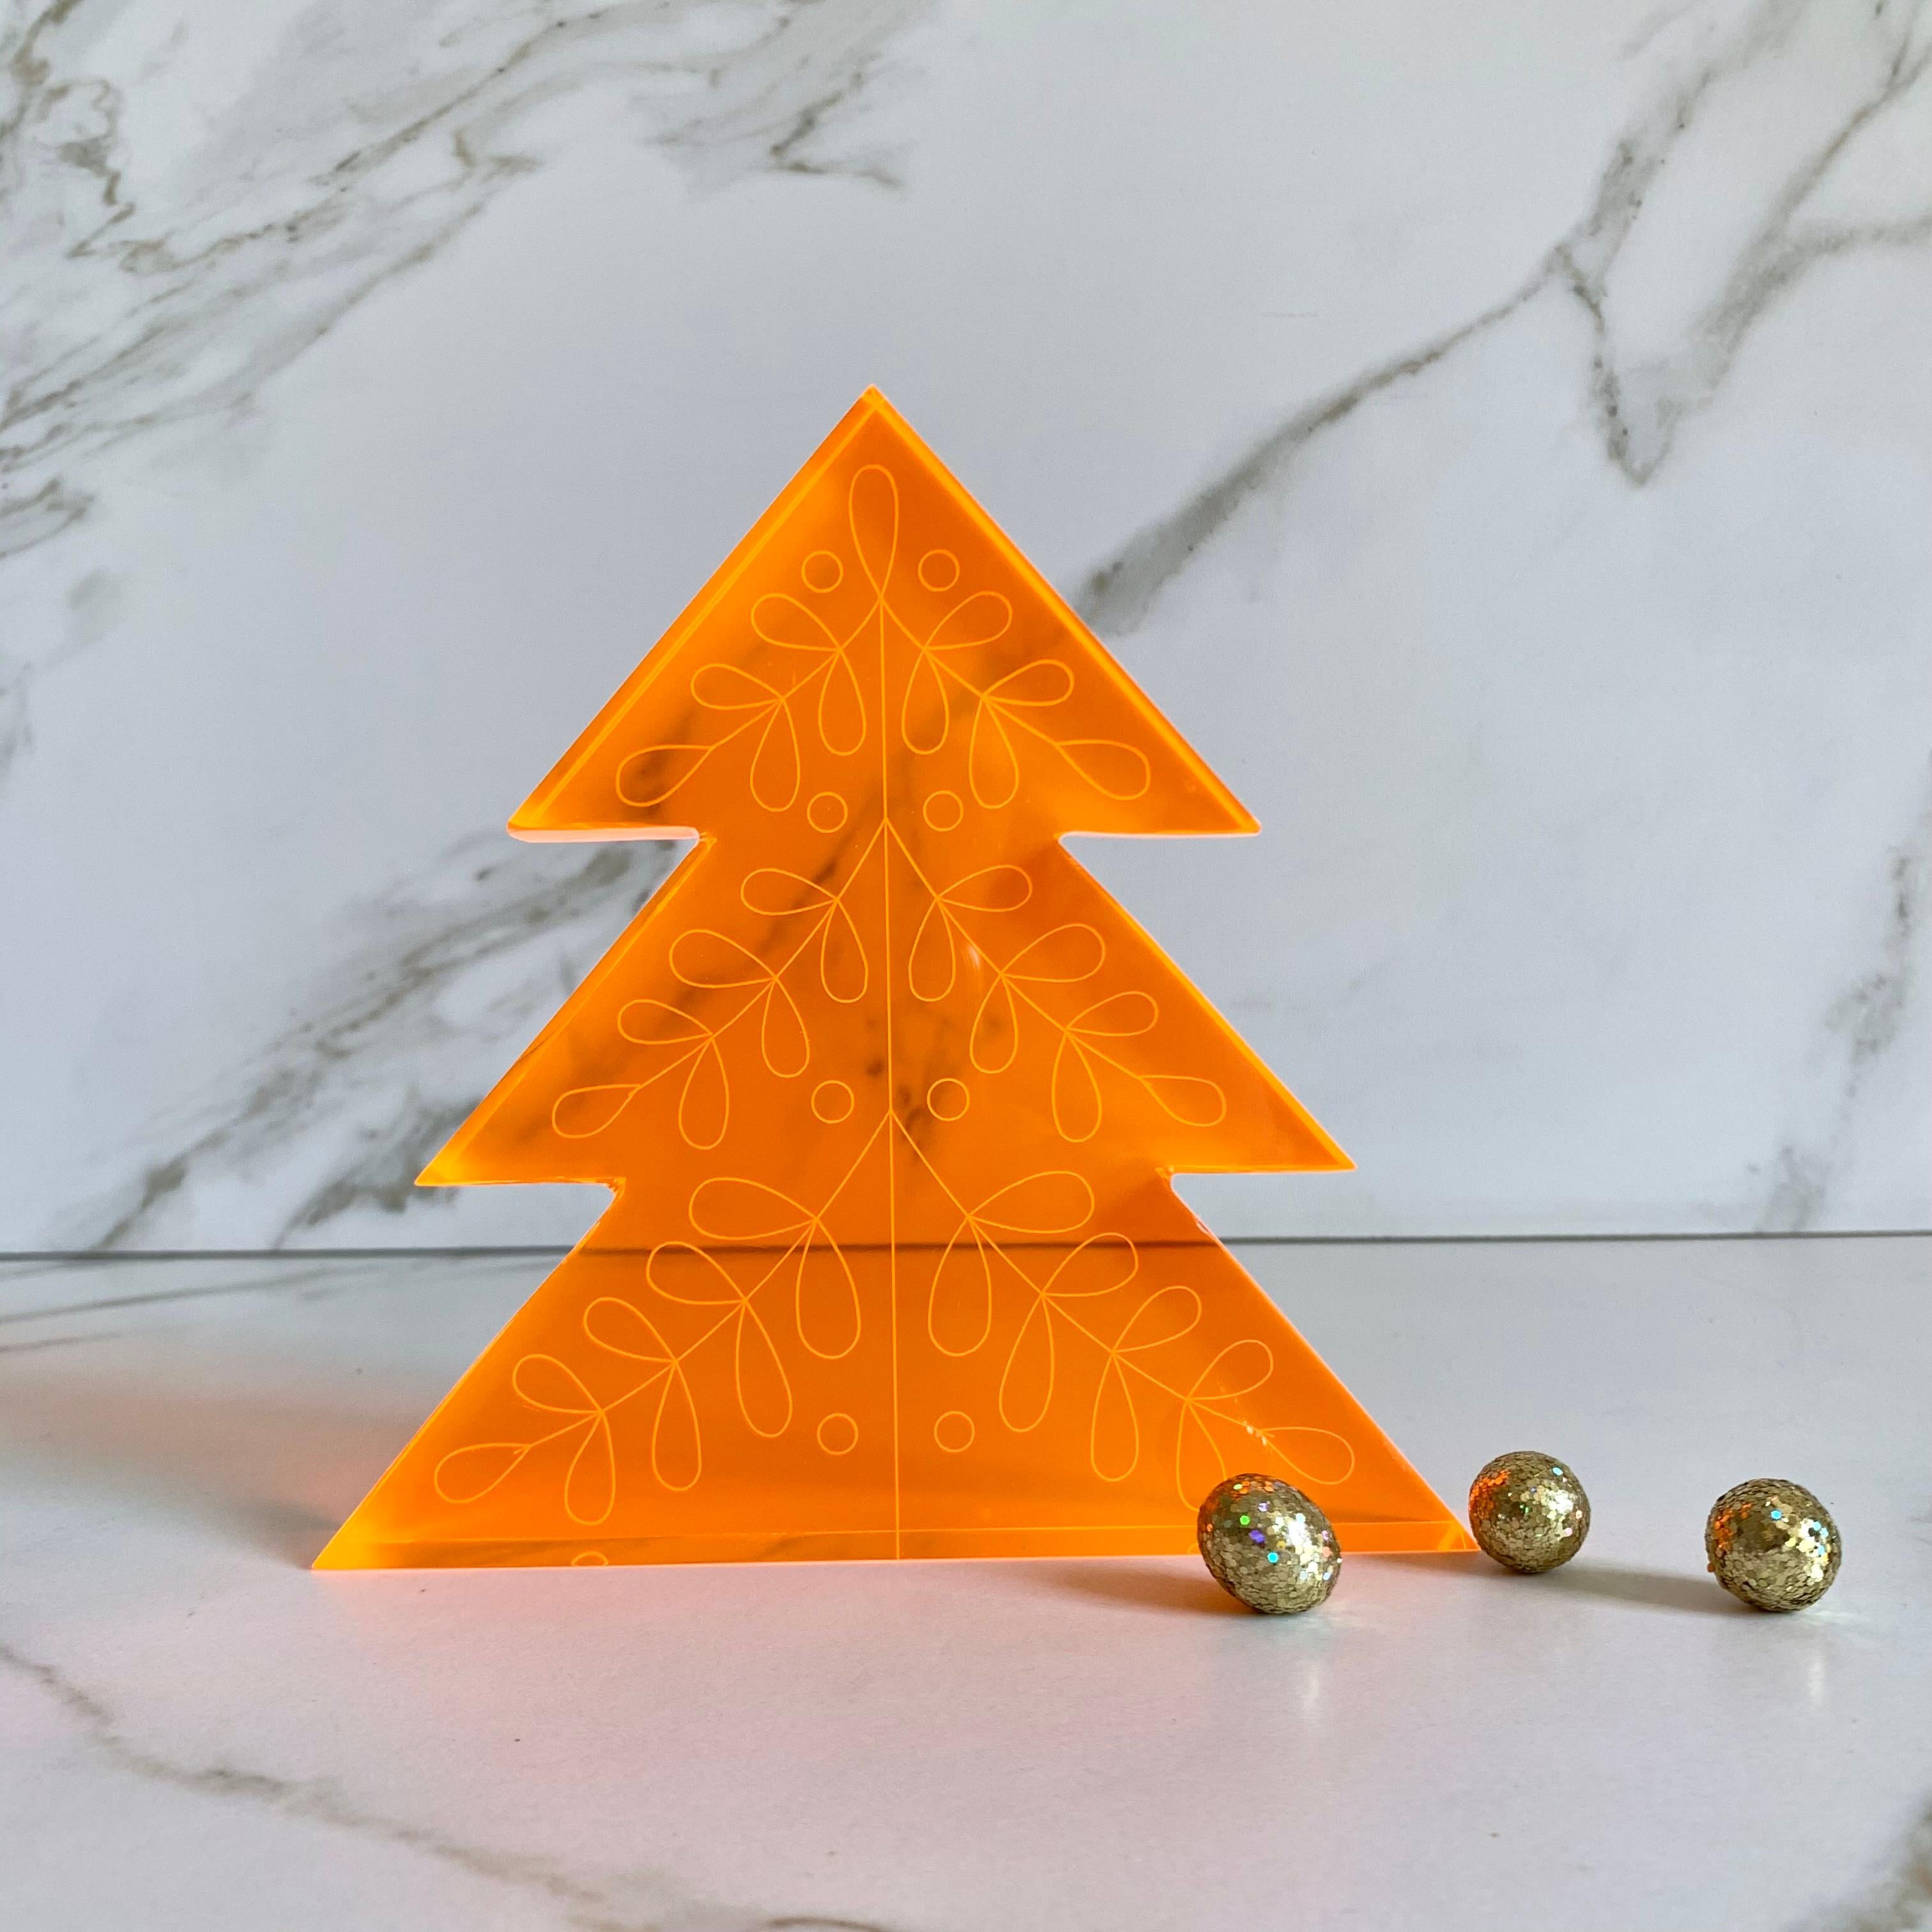 Christmas is a season of joy and, for us that means color! Celebrate the season with this colorful, fun and modern Christmas Tree sculptures, and give a new twist to the traditional Christmas color palette. This sculptures will look merry and bright